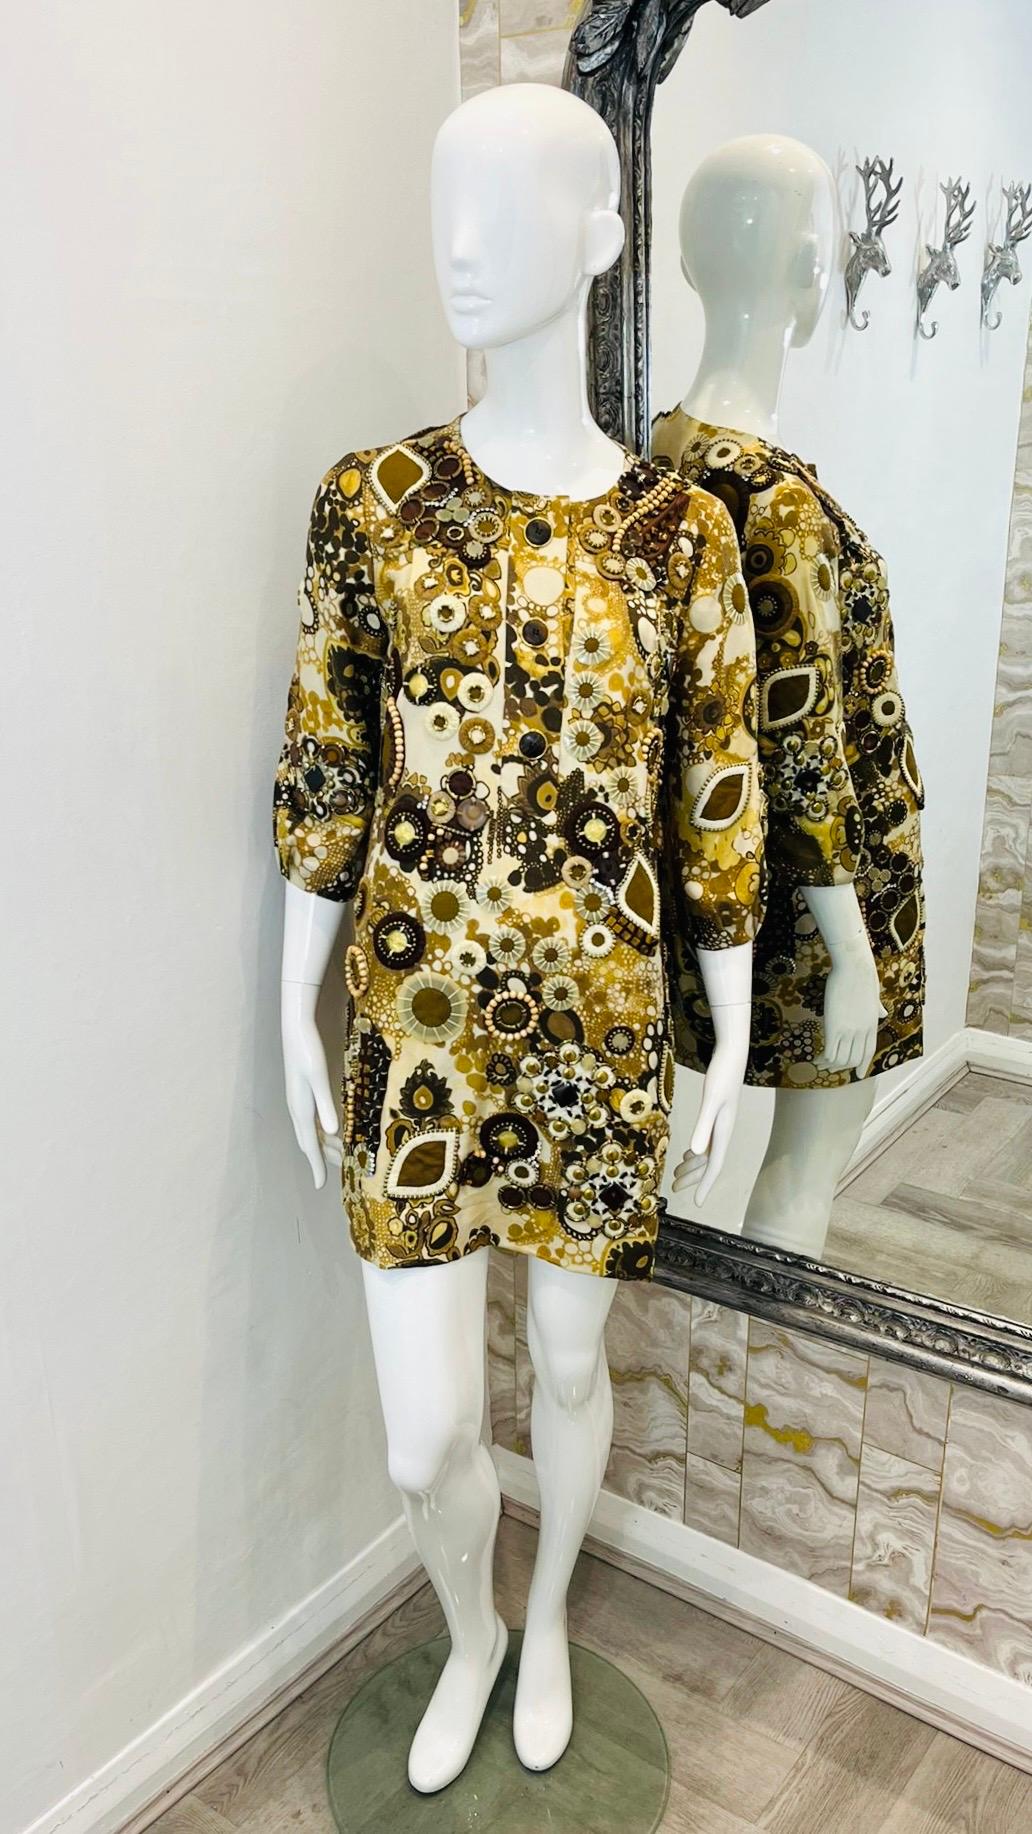 Chloe Bead Embellished Silk Dress

Brown printed dress designed with decorative beads, sequins and crystal adornments throughout.

Featuring round neckline detailed with tripe button accent.

Styled with three-quarter sleeves and loose-fit